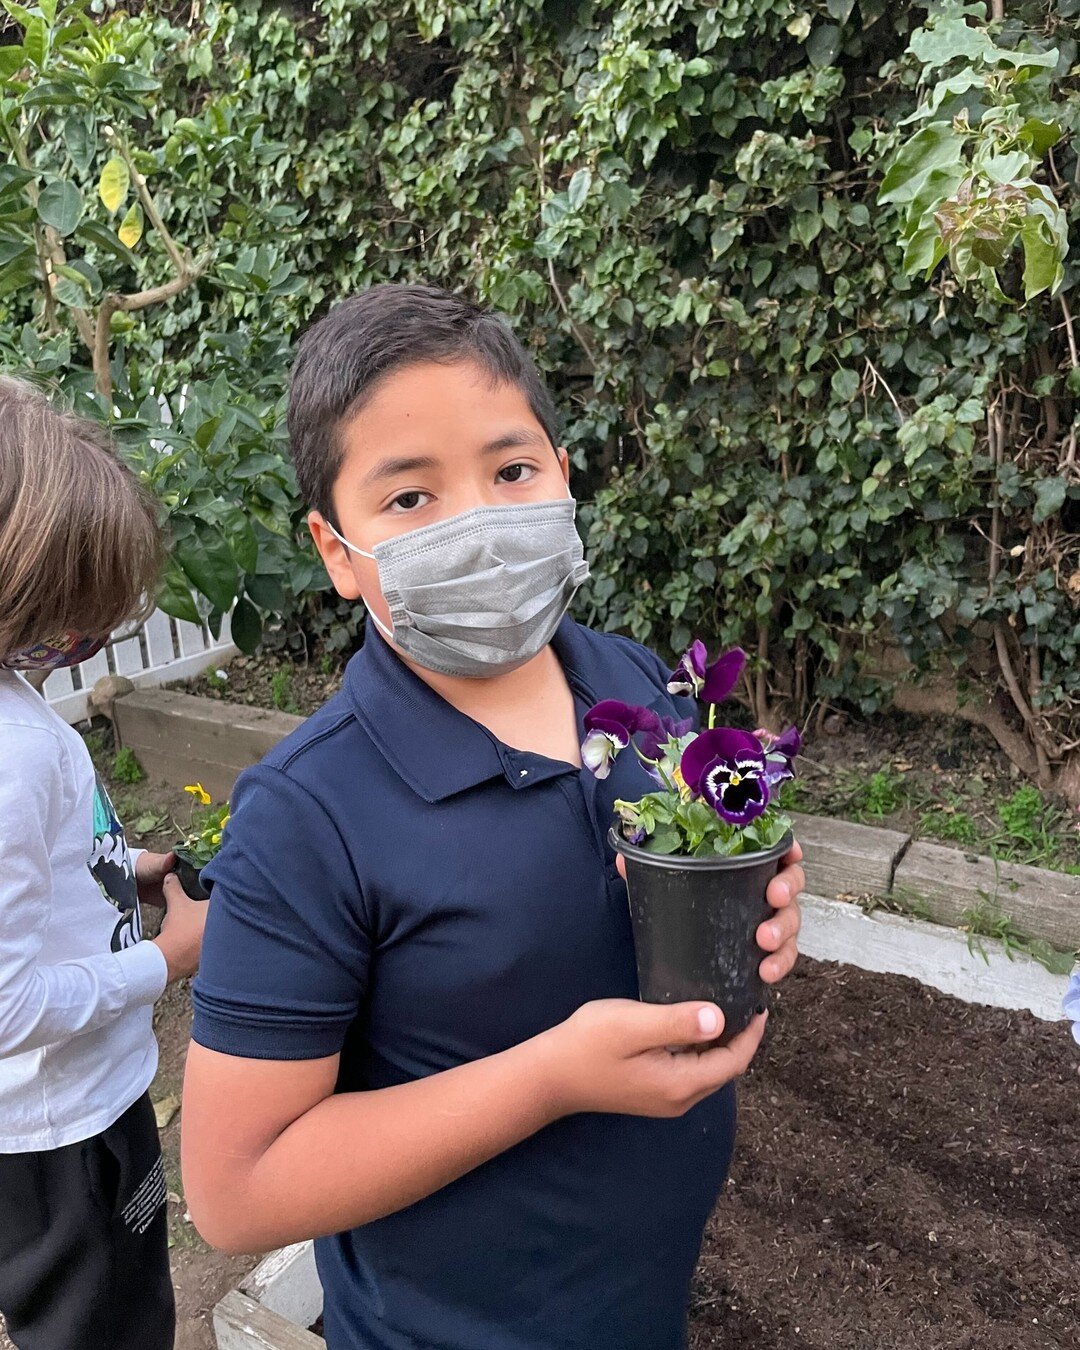 This spring, our students have put their green thumbs to work during Gardening Club. Every week students learn how to tend to the soil, plant fruit, veggies, and flowers, as well as the responsibility of watering regularly.  With the help of Westmont